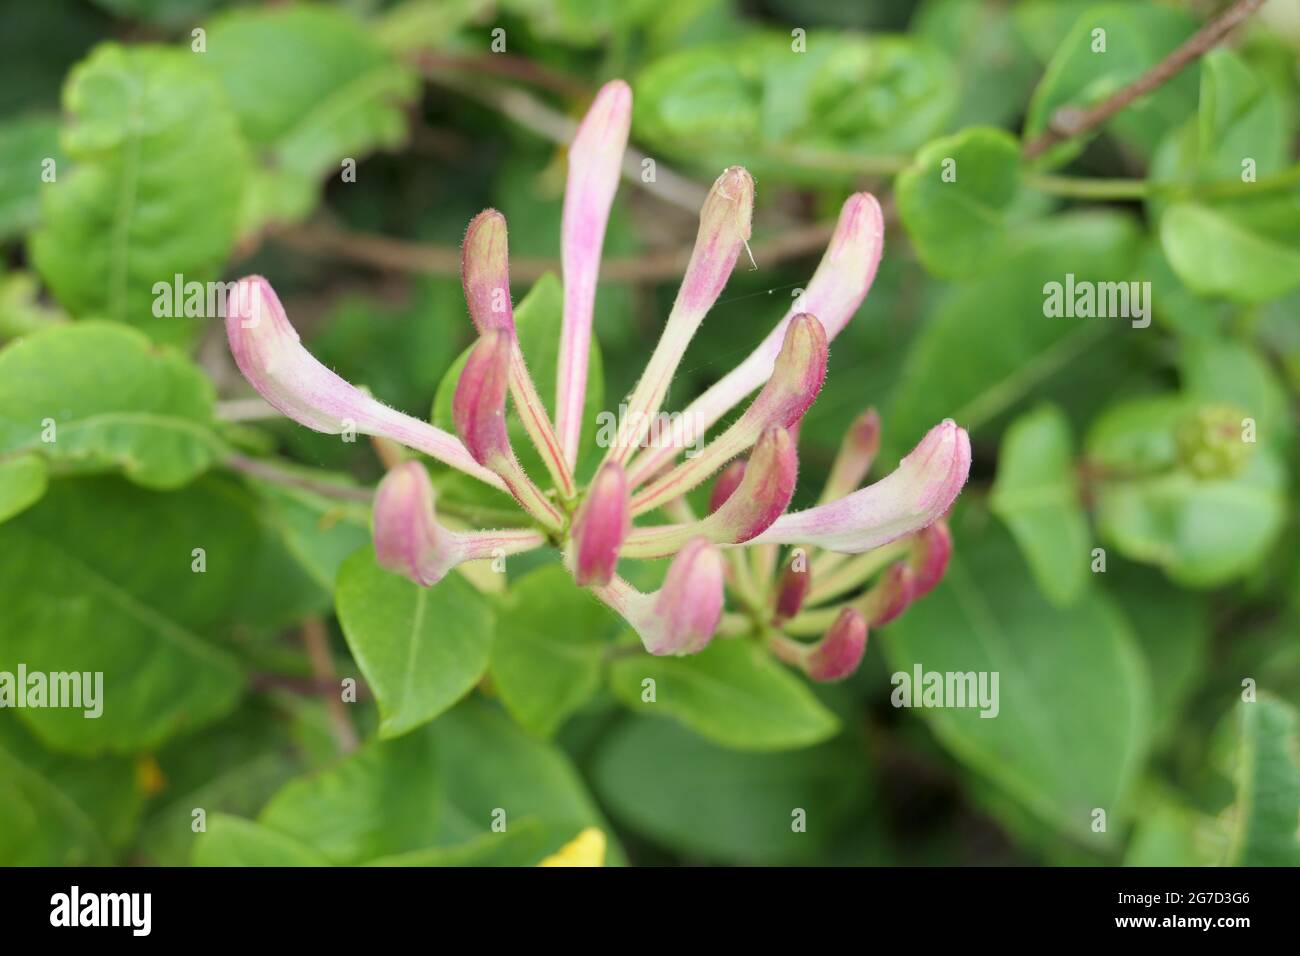 Close-up of Honeysuckle flowers or Woodbine (Lonicera periclymenum) before they open Stock Photo